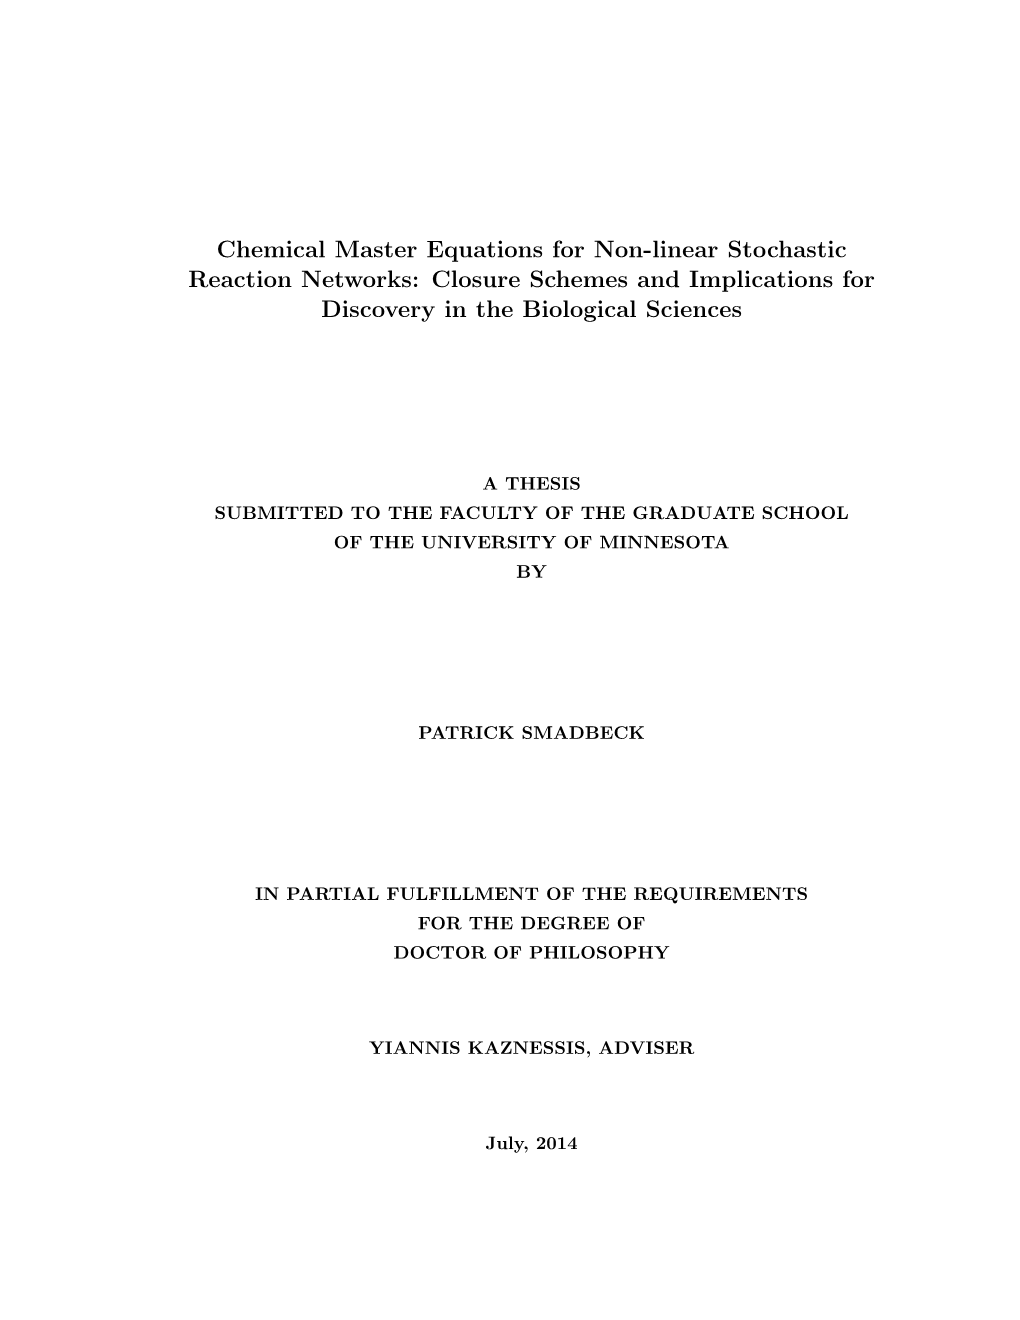 Chemical Master Equations for Non-Linear Stochastic Reaction Networks: Closure Schemes and Implications for Discovery in the Biological Sciences